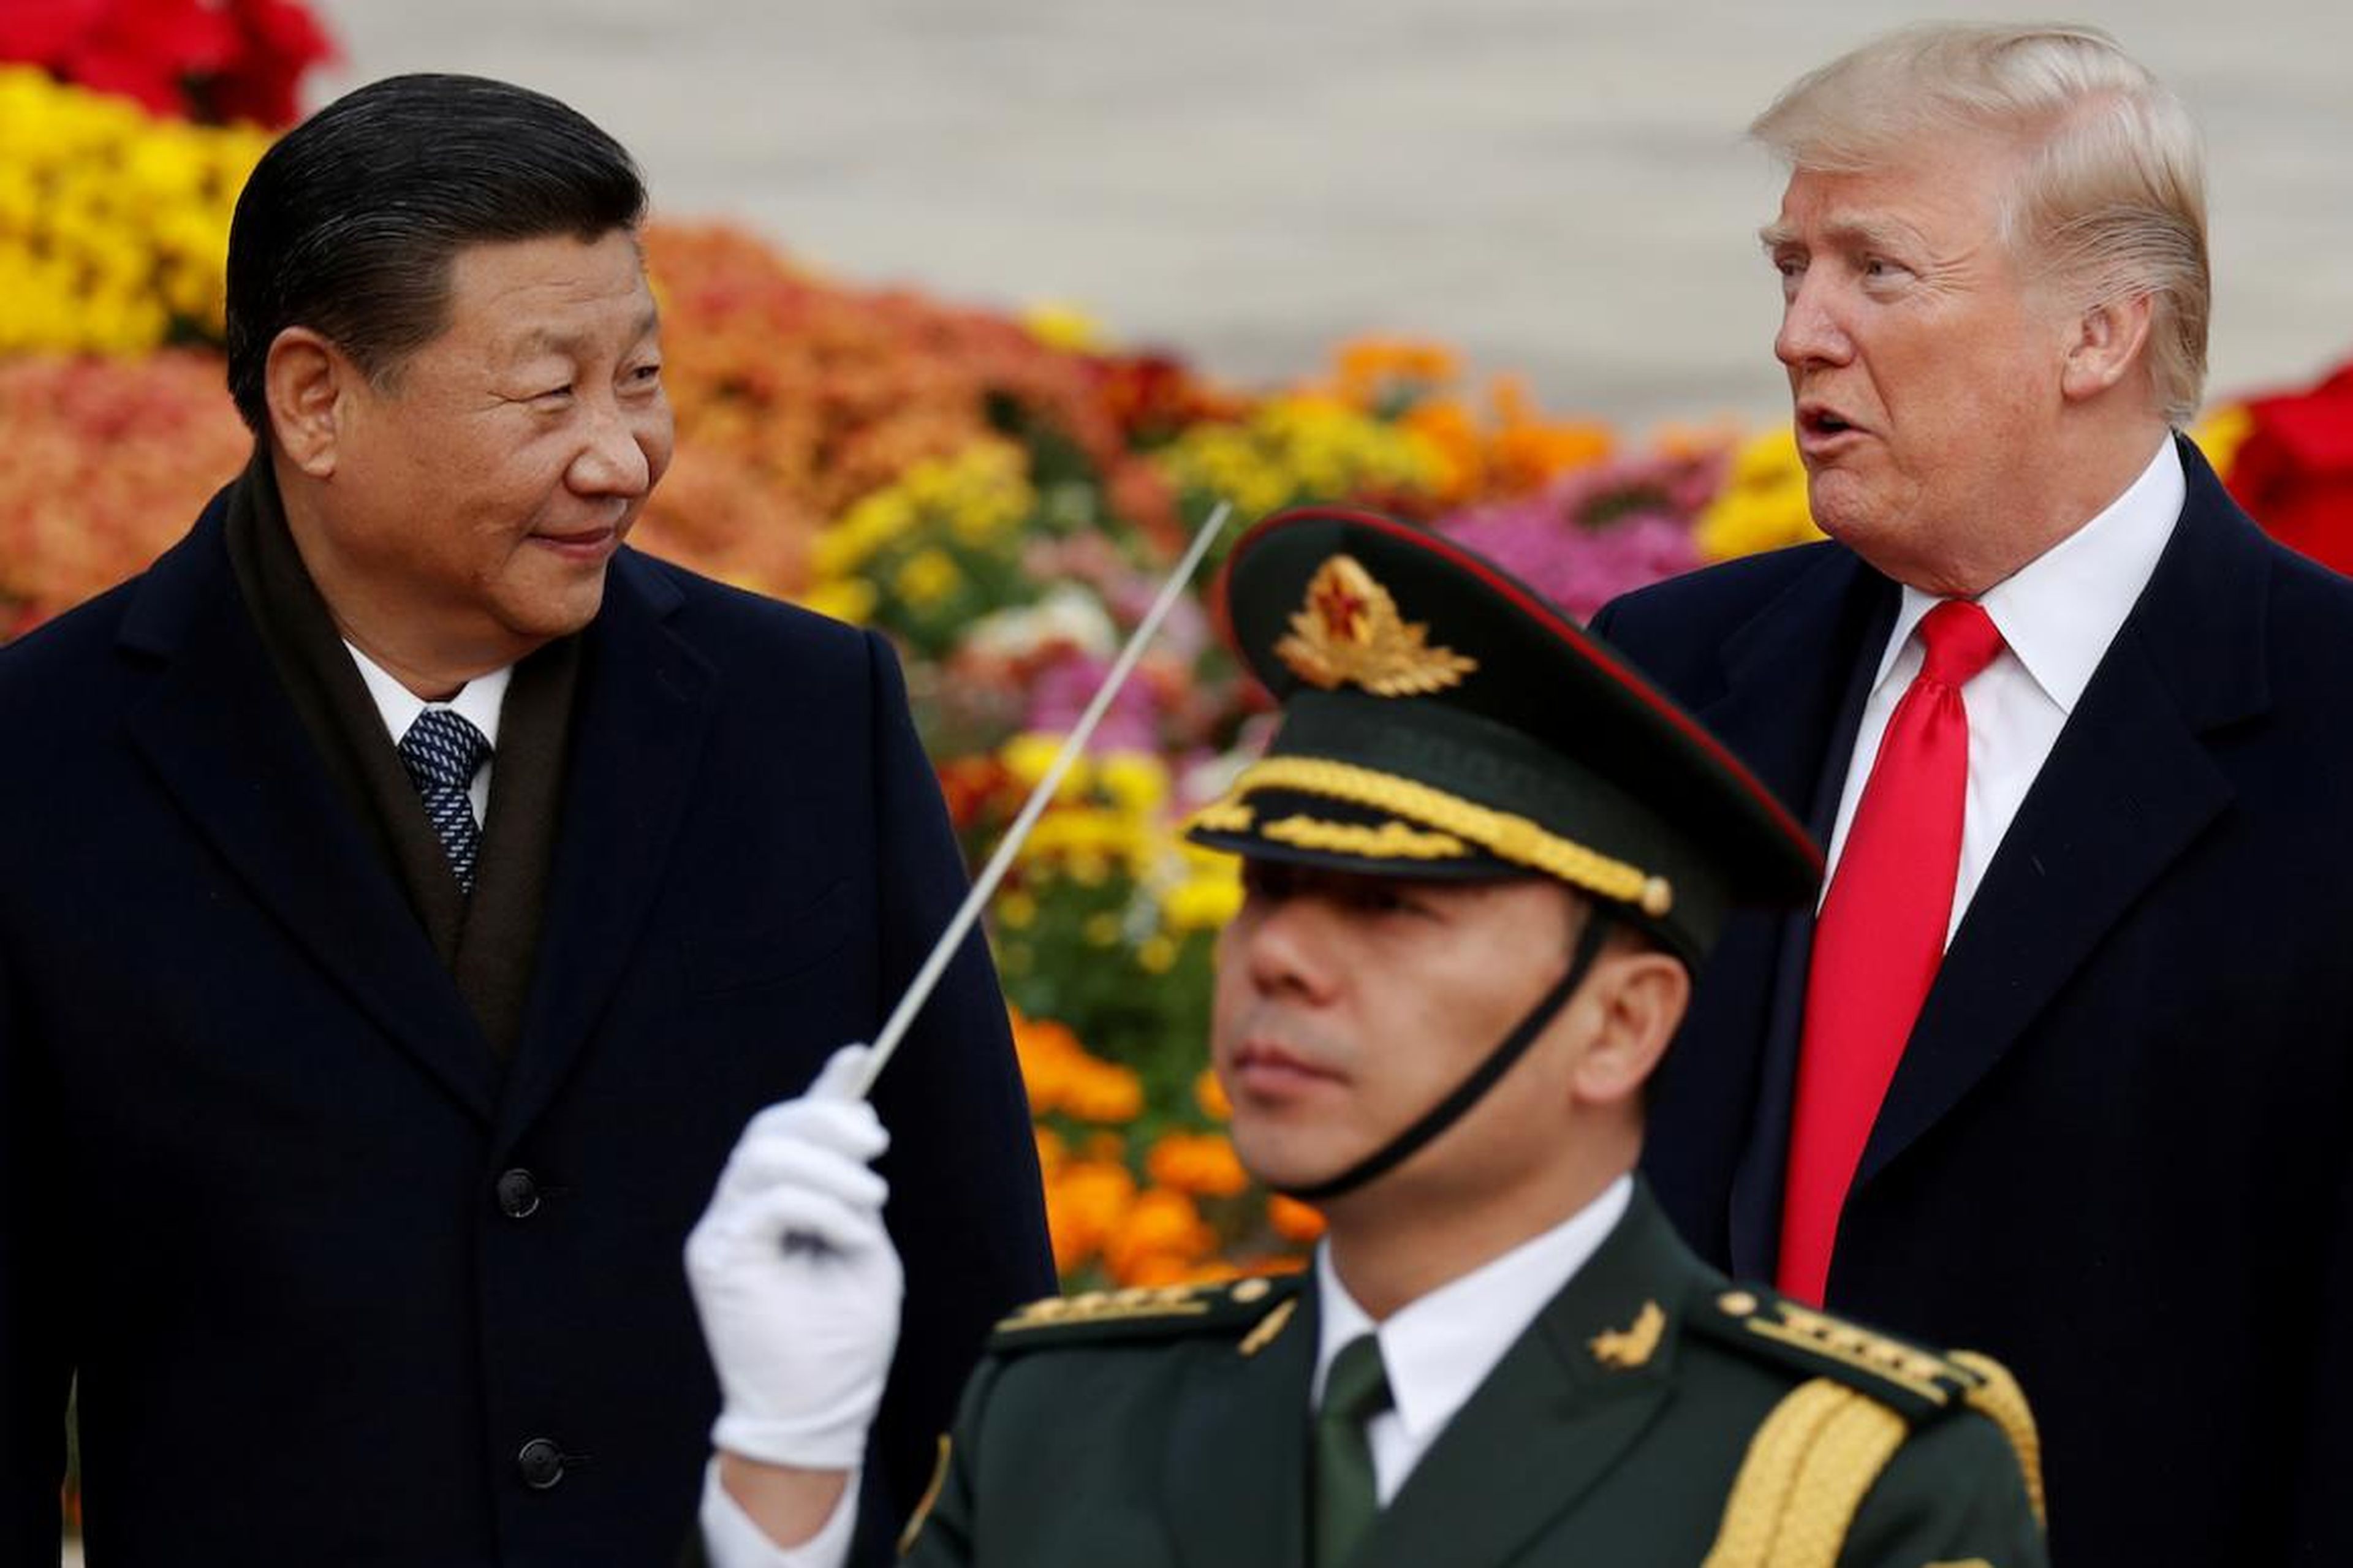 Chinese President Xi Jinping and US President Donald Trump at the Great Hall of the People in Beijing, China, in November 2017.